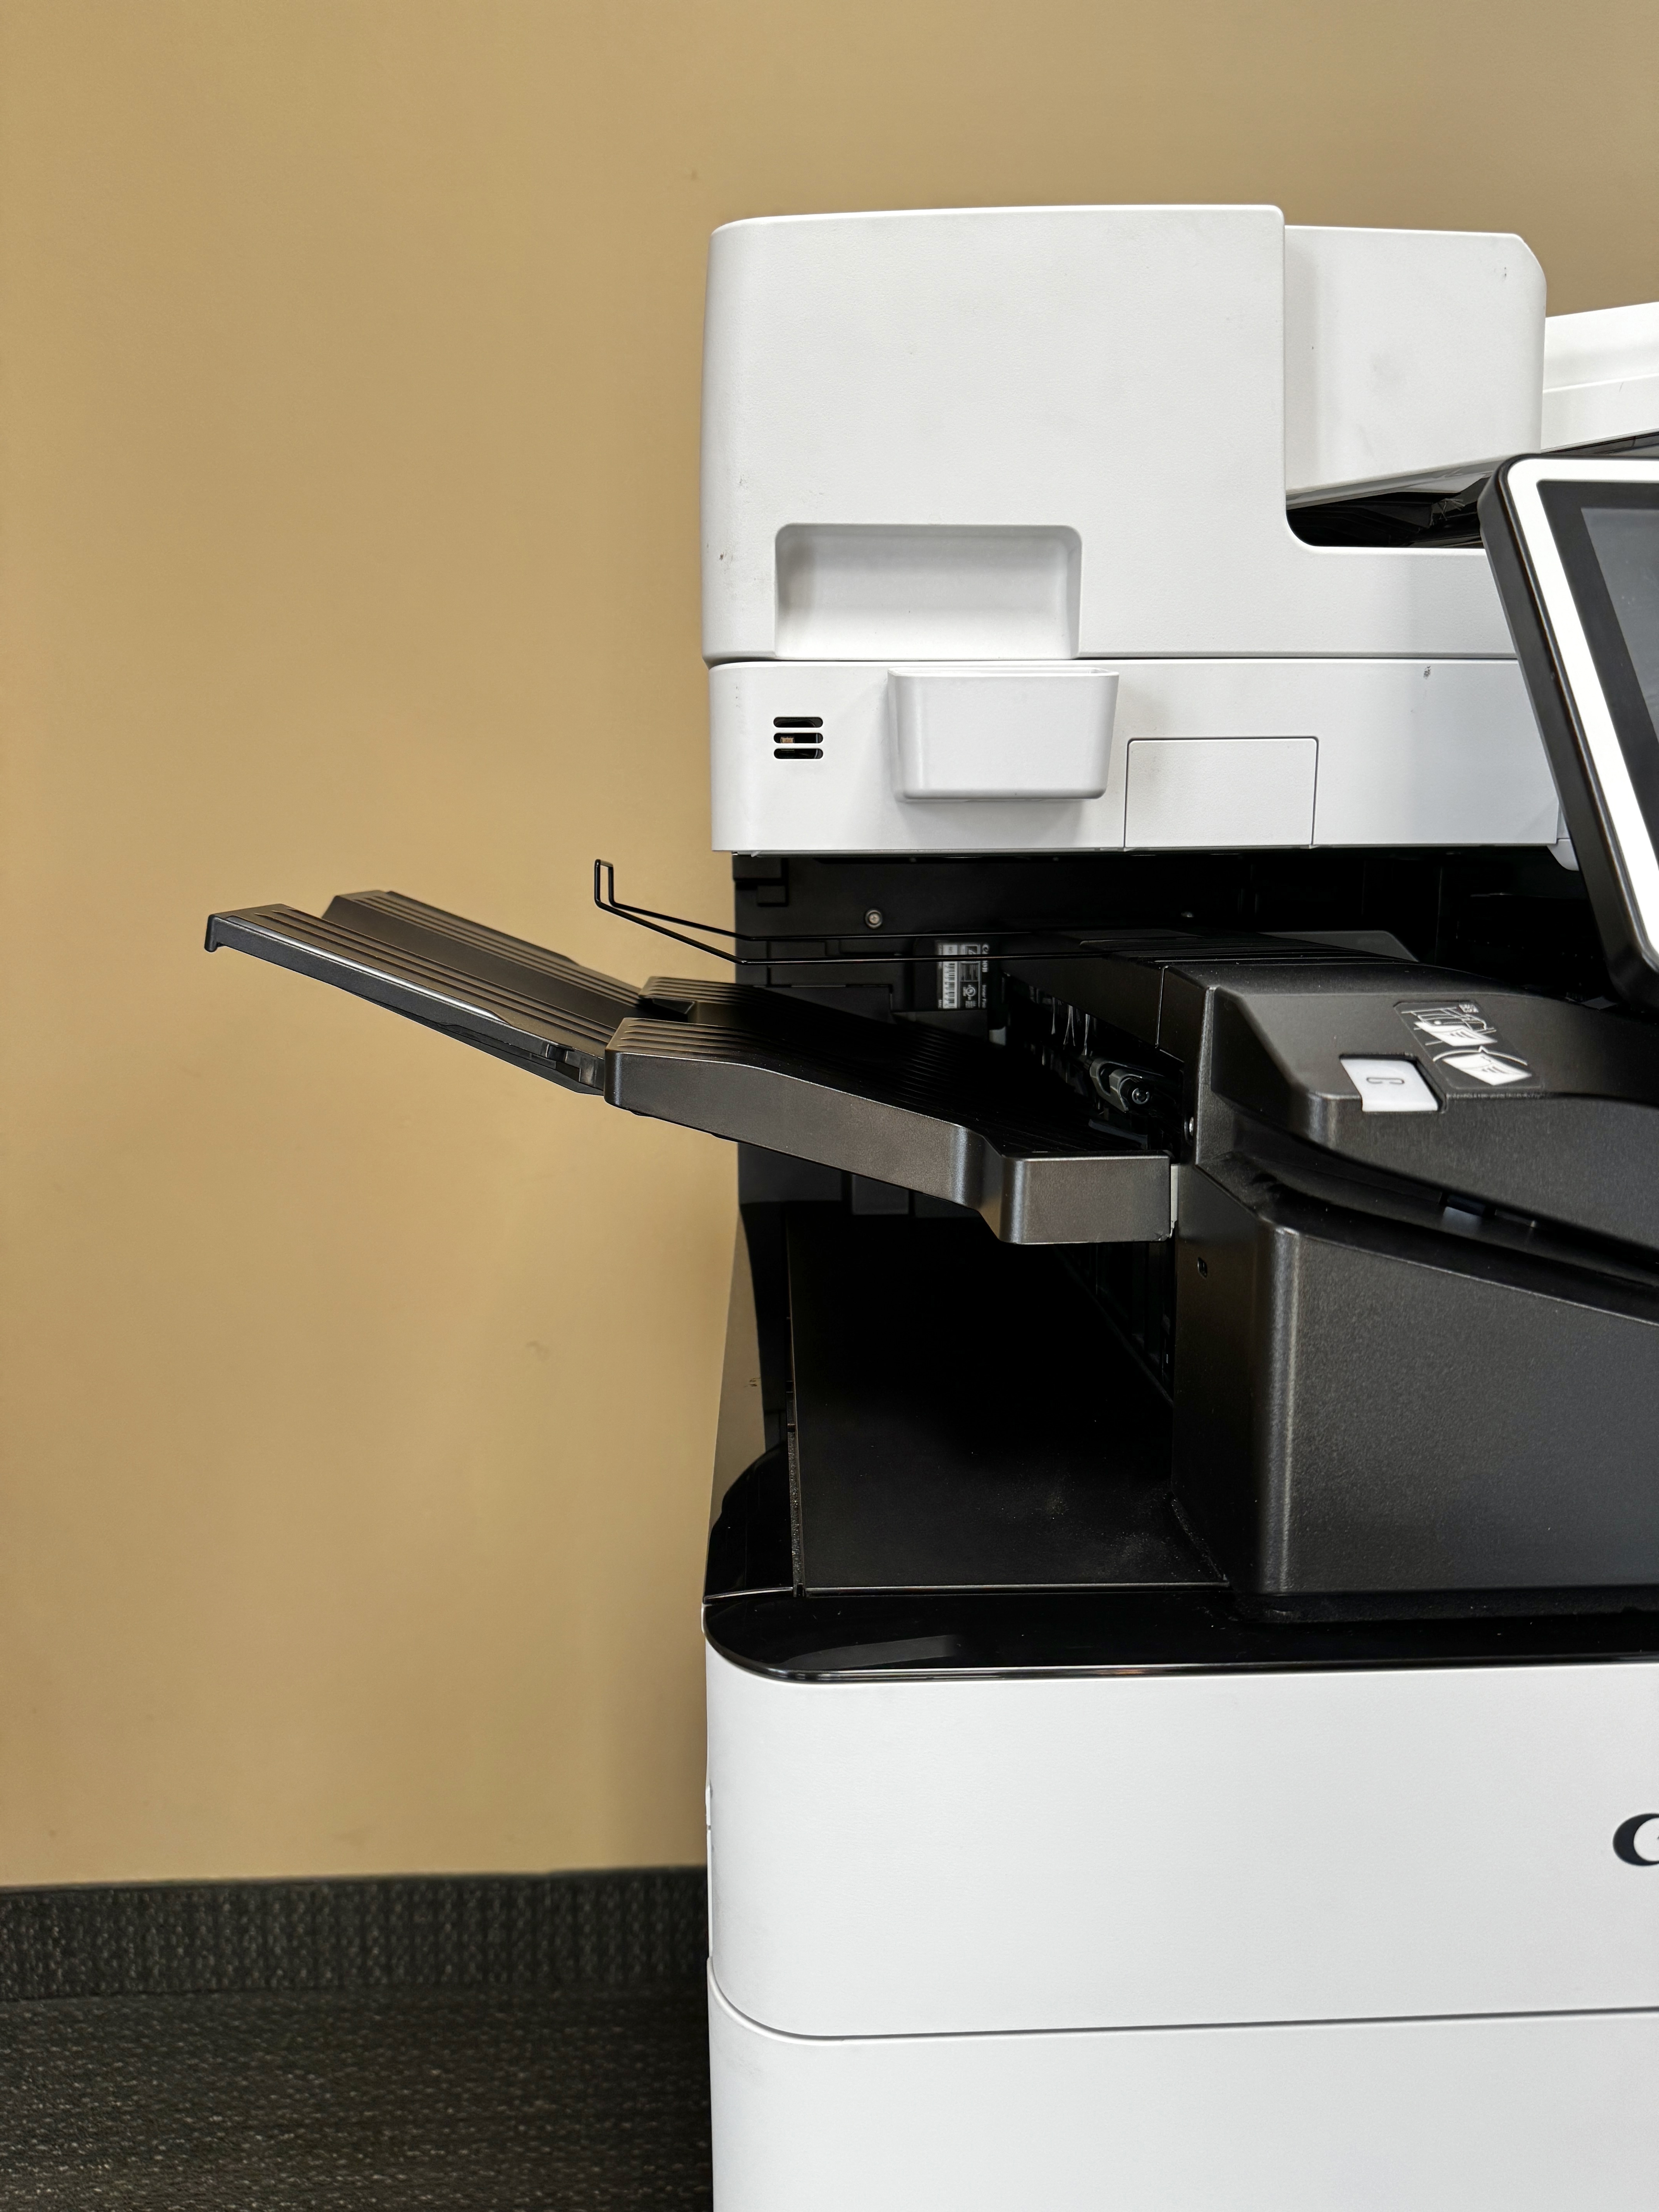 Canon Imagerunner Advance C5735ii color printer leasing. 